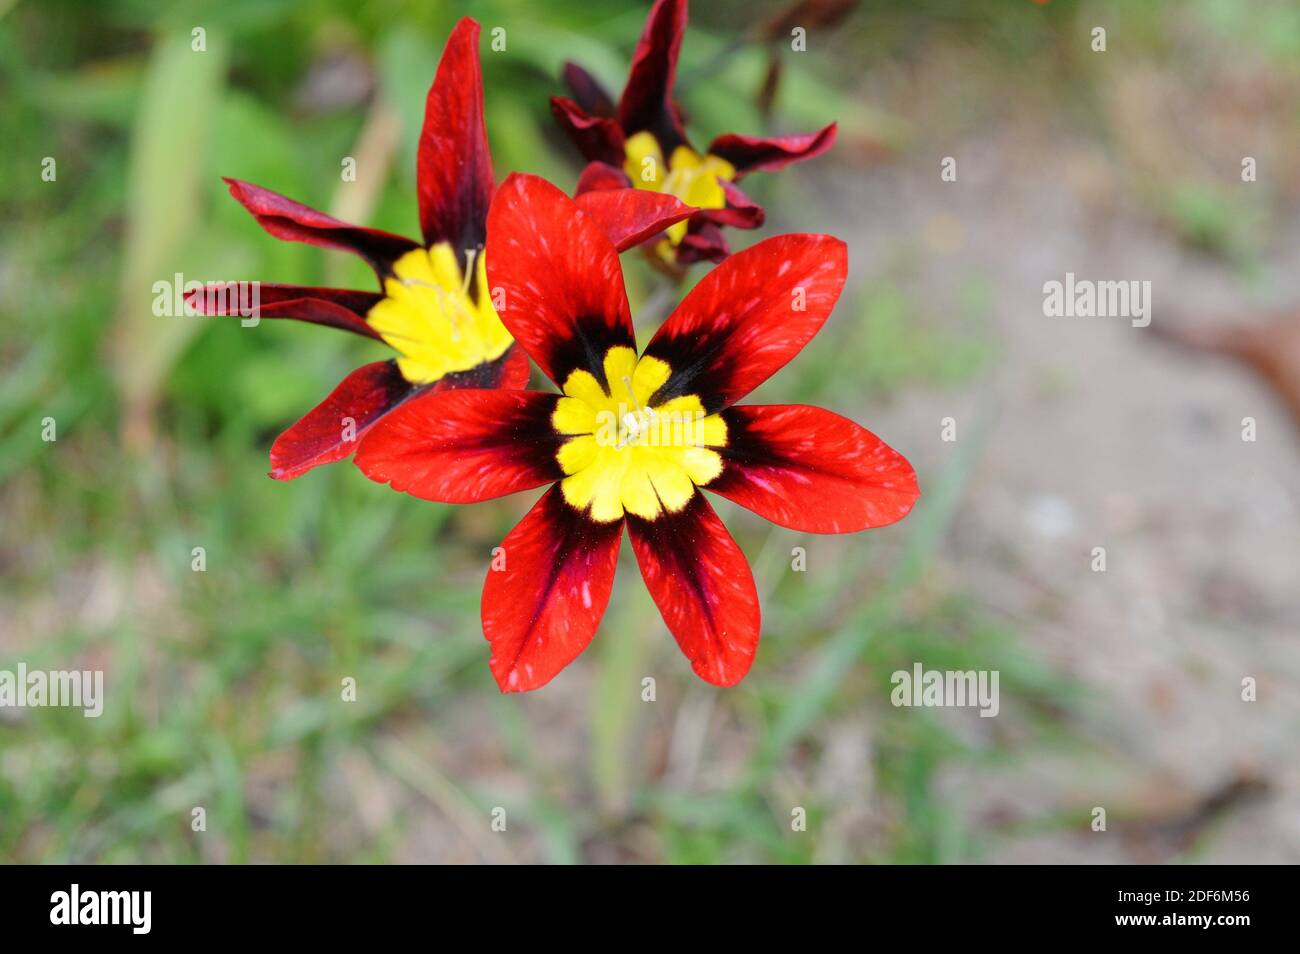 Harlequin flower or wandflower (Sparaxis tricolor) is an ornamental plant native to South Africa. Stock Photo